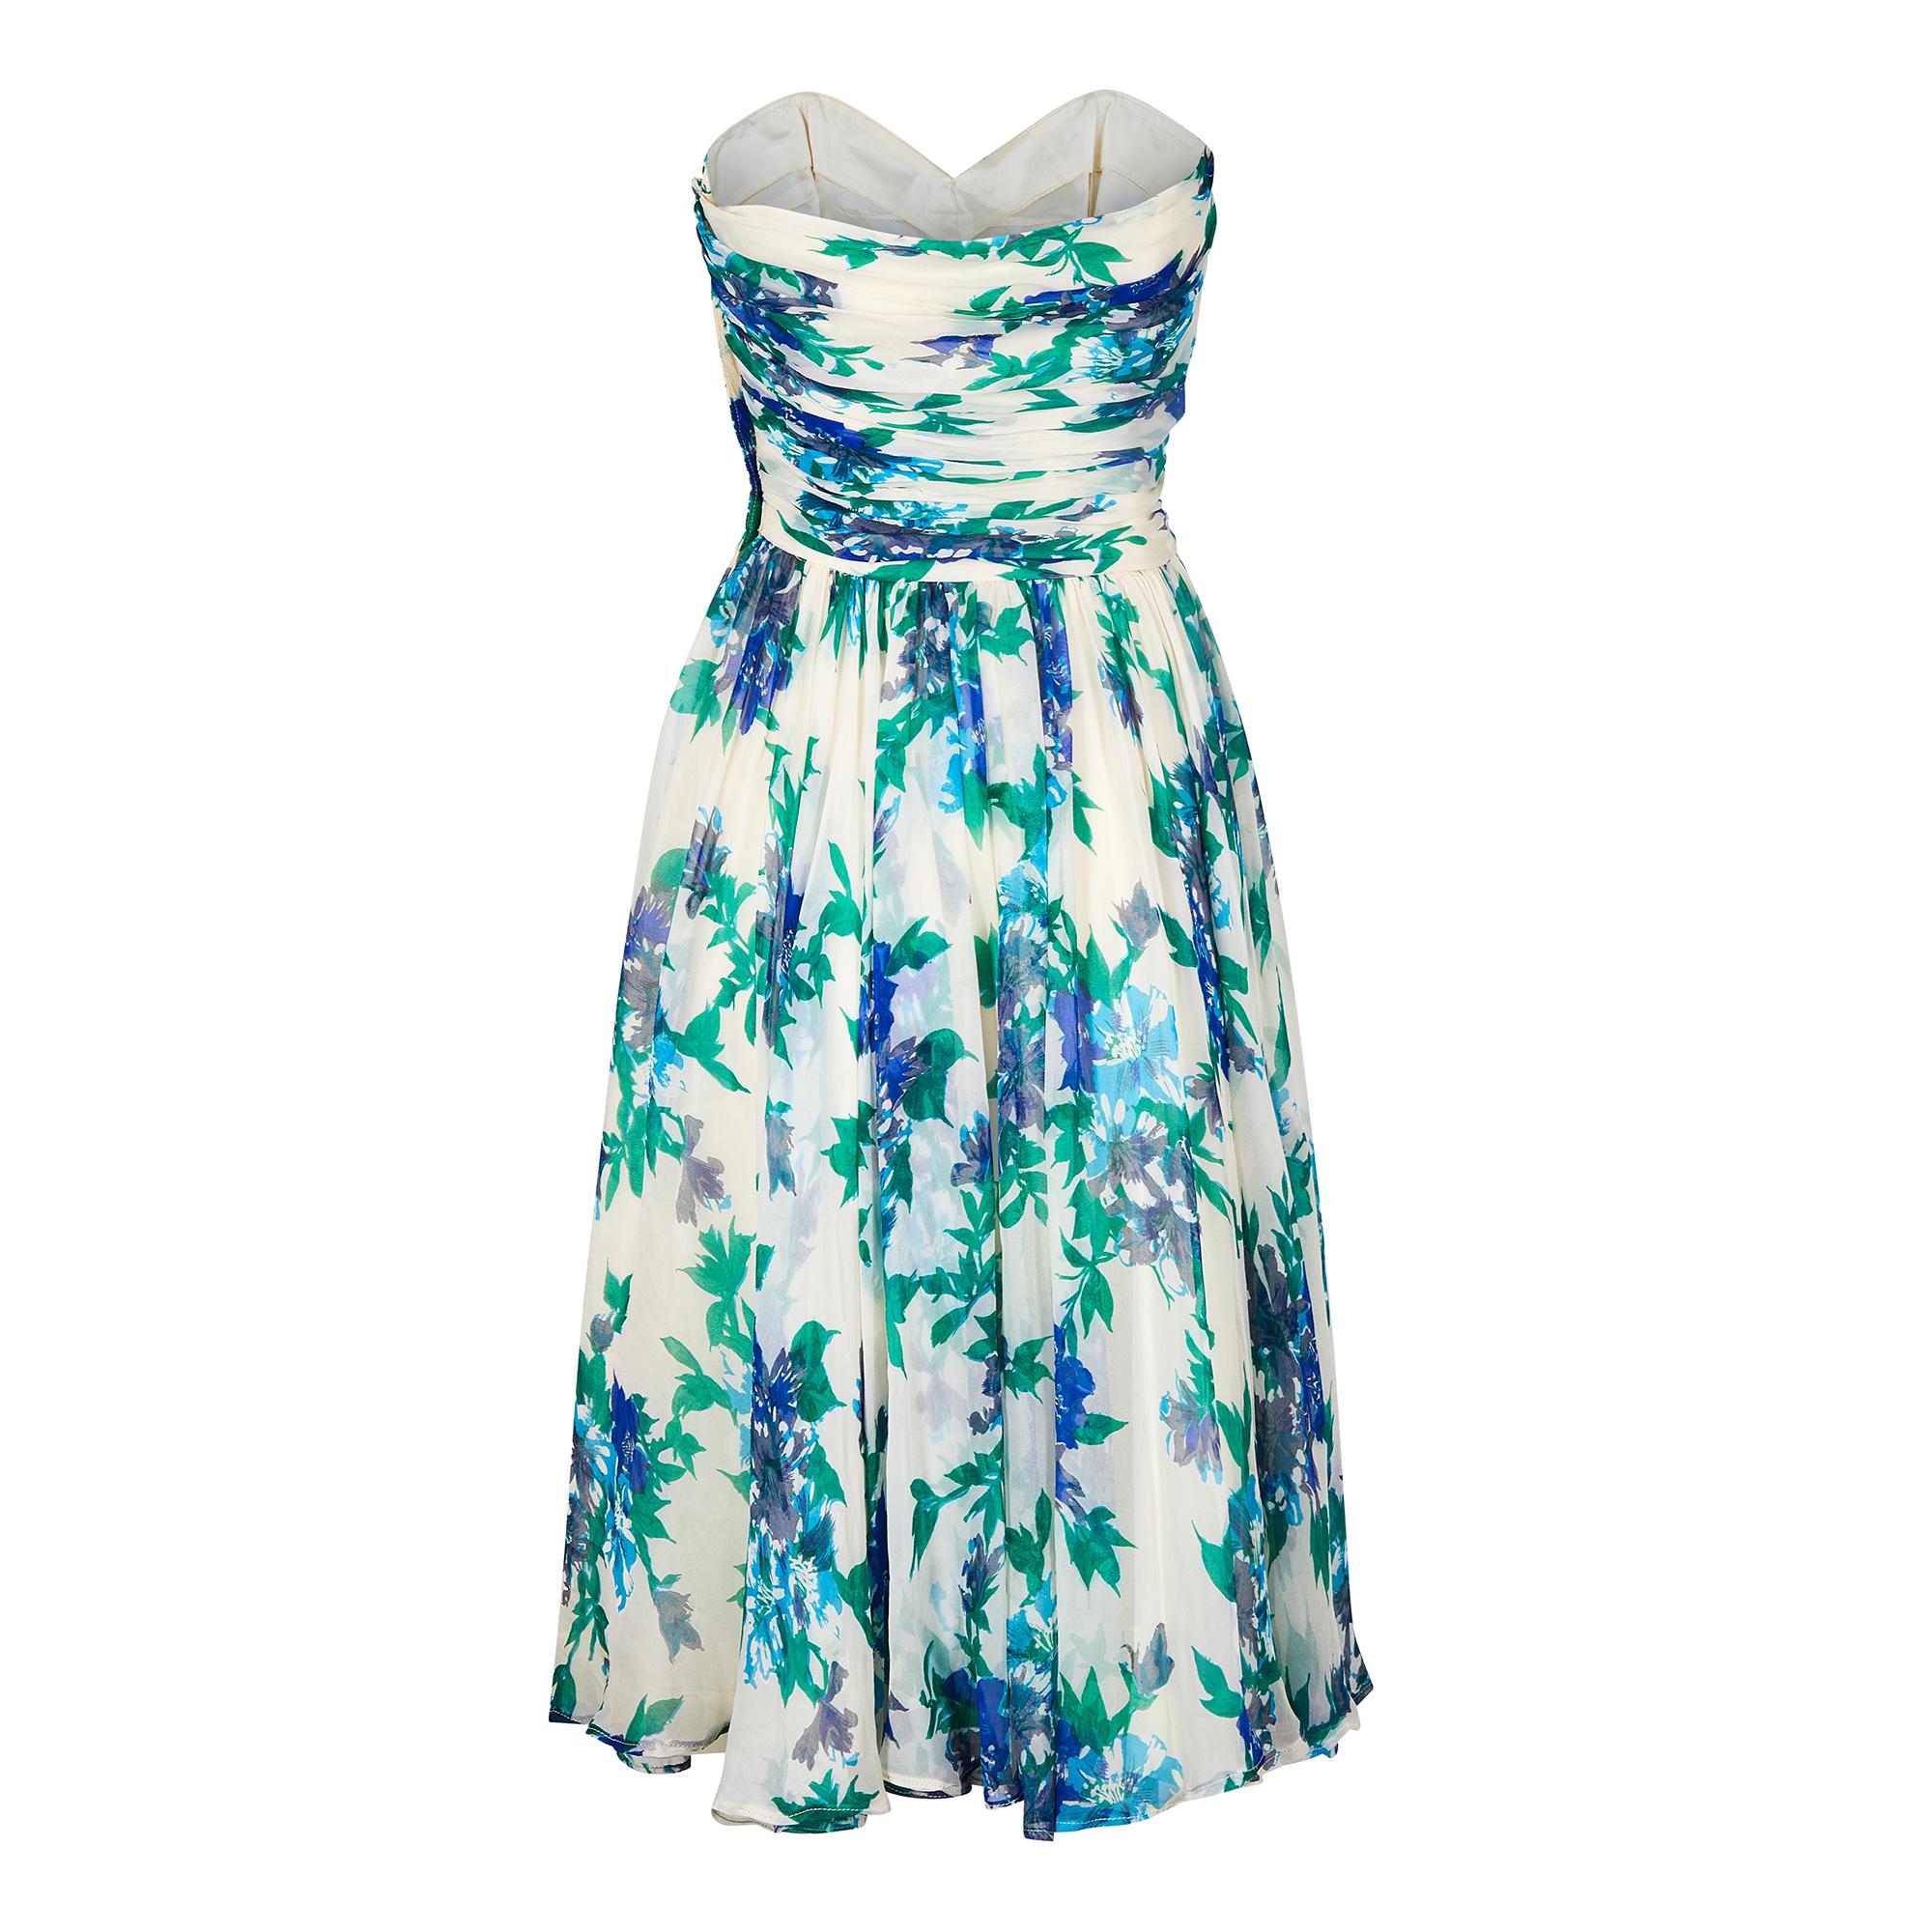 1950s floral silk chiffon strapless dress with matching scarf. This delightful silk chiffon dress has a wonderful colour combination of cobalt blue, turquoise and emerald green against an an ivory background.  The bodice has the archetypal ruching